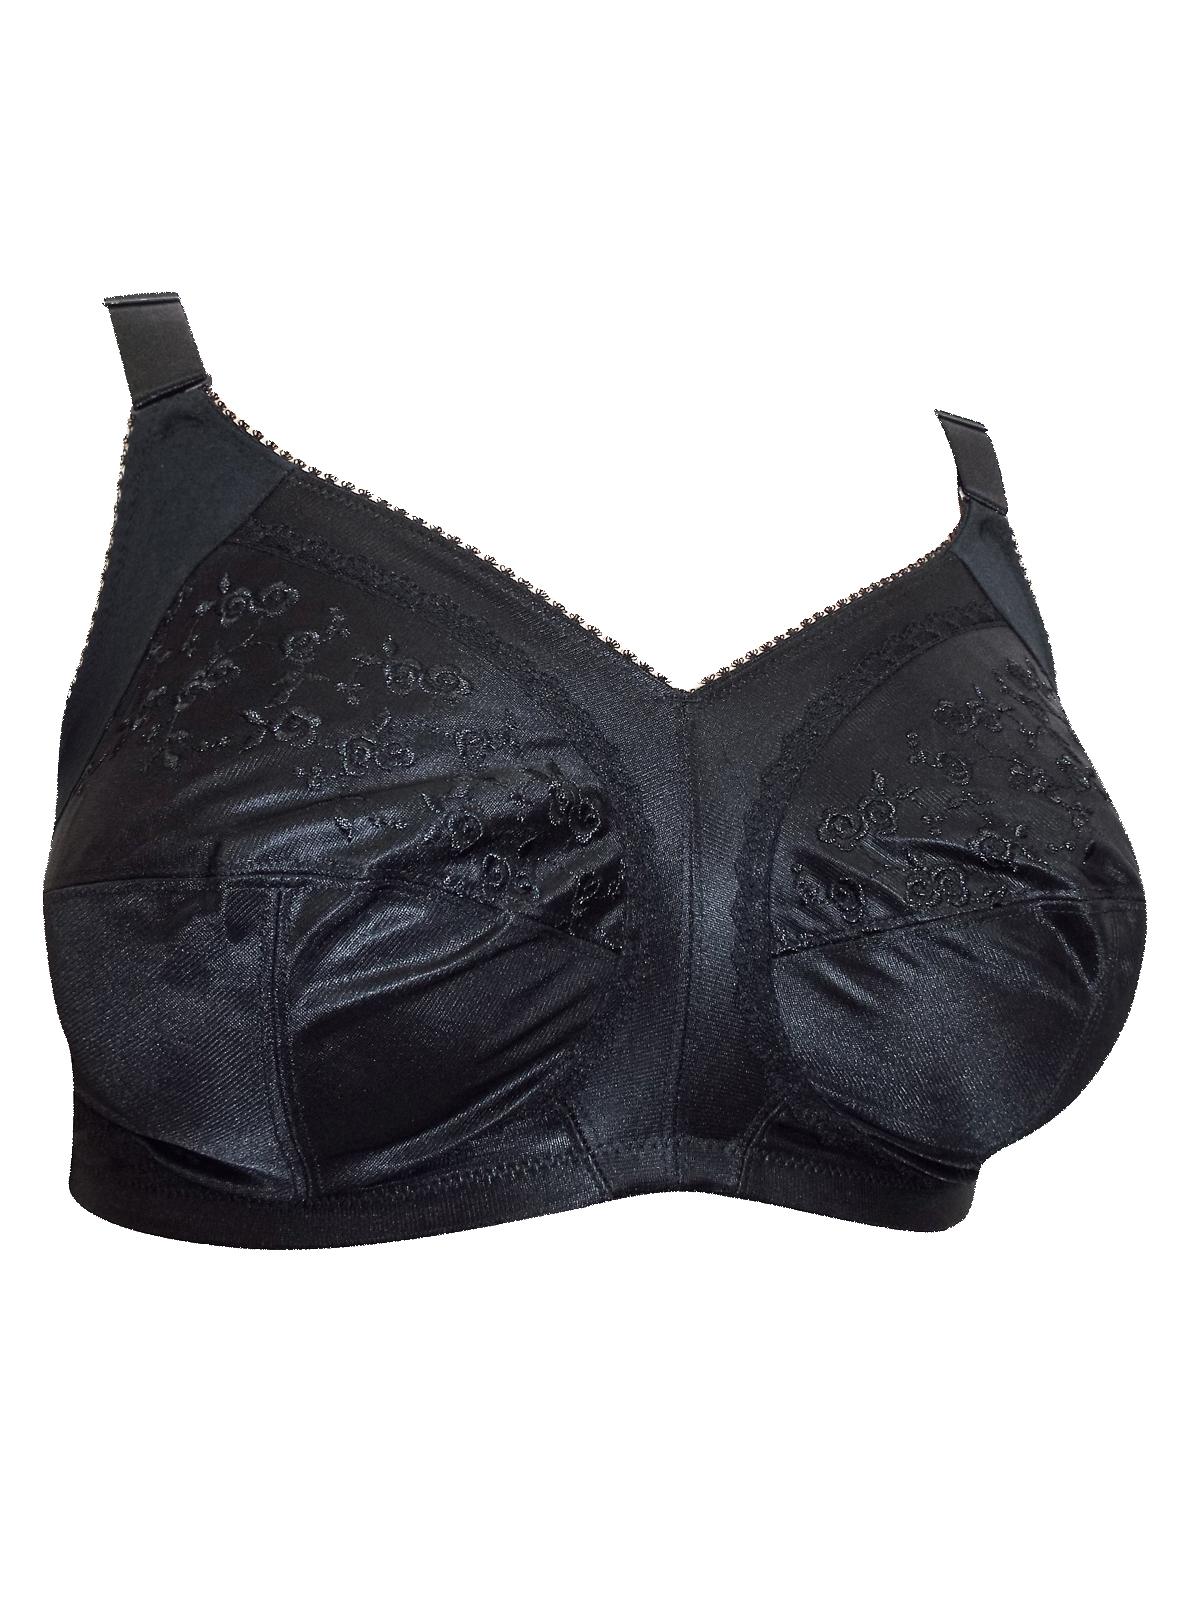 F&F - - F&F BLACK Embroidered Total Support Full Cup Bra - Size 36 to ...